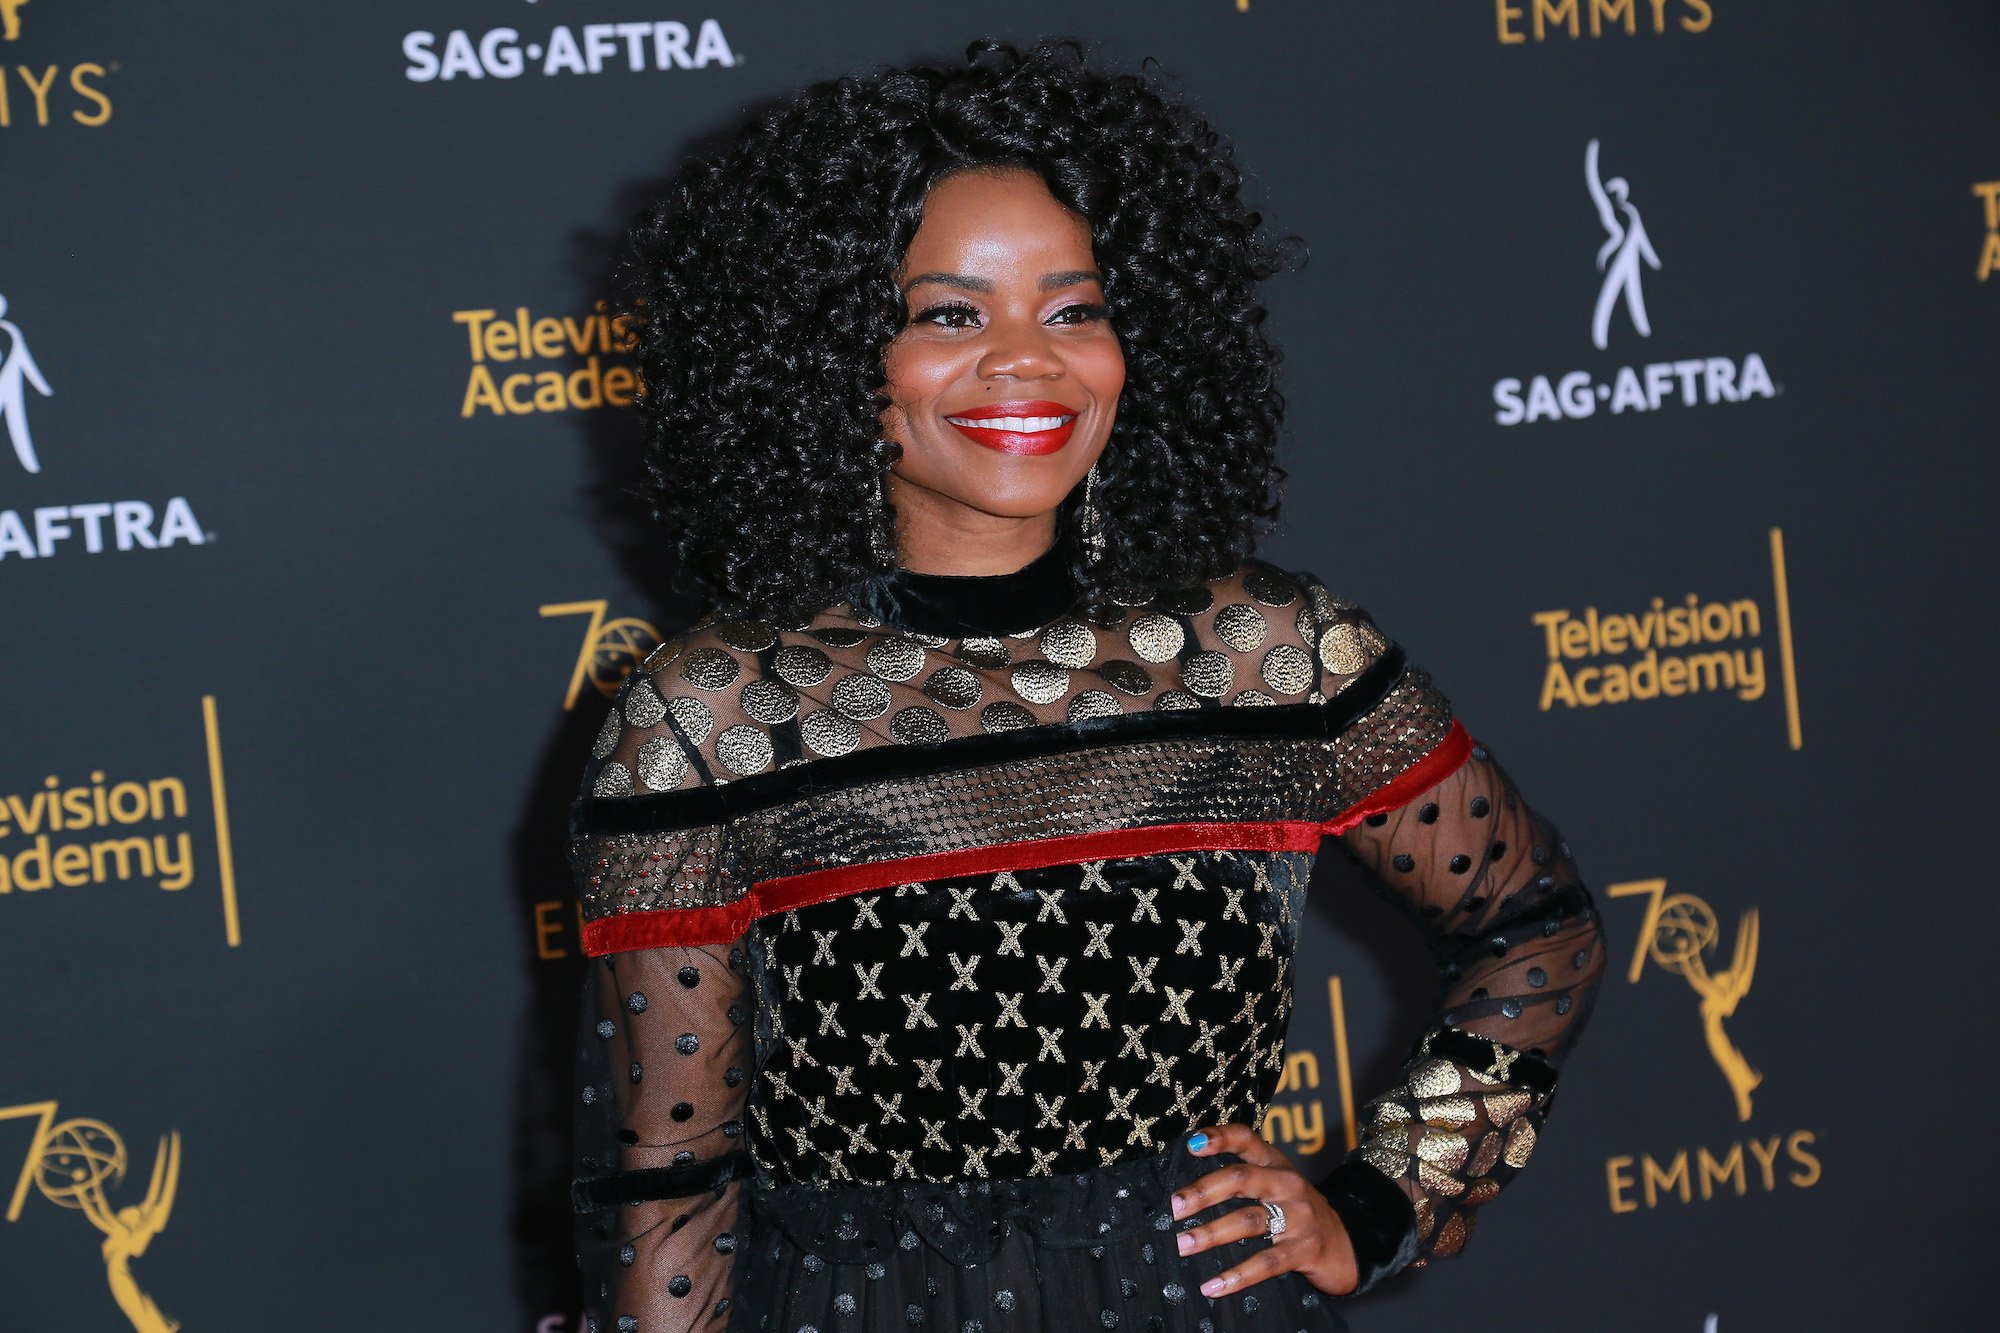 Kelly Jenrette dressed in a black, red and gold dress at the the Television Academy And SAG-AFTRA Co-Host Dynamic & Diverse Emmy Celebration.